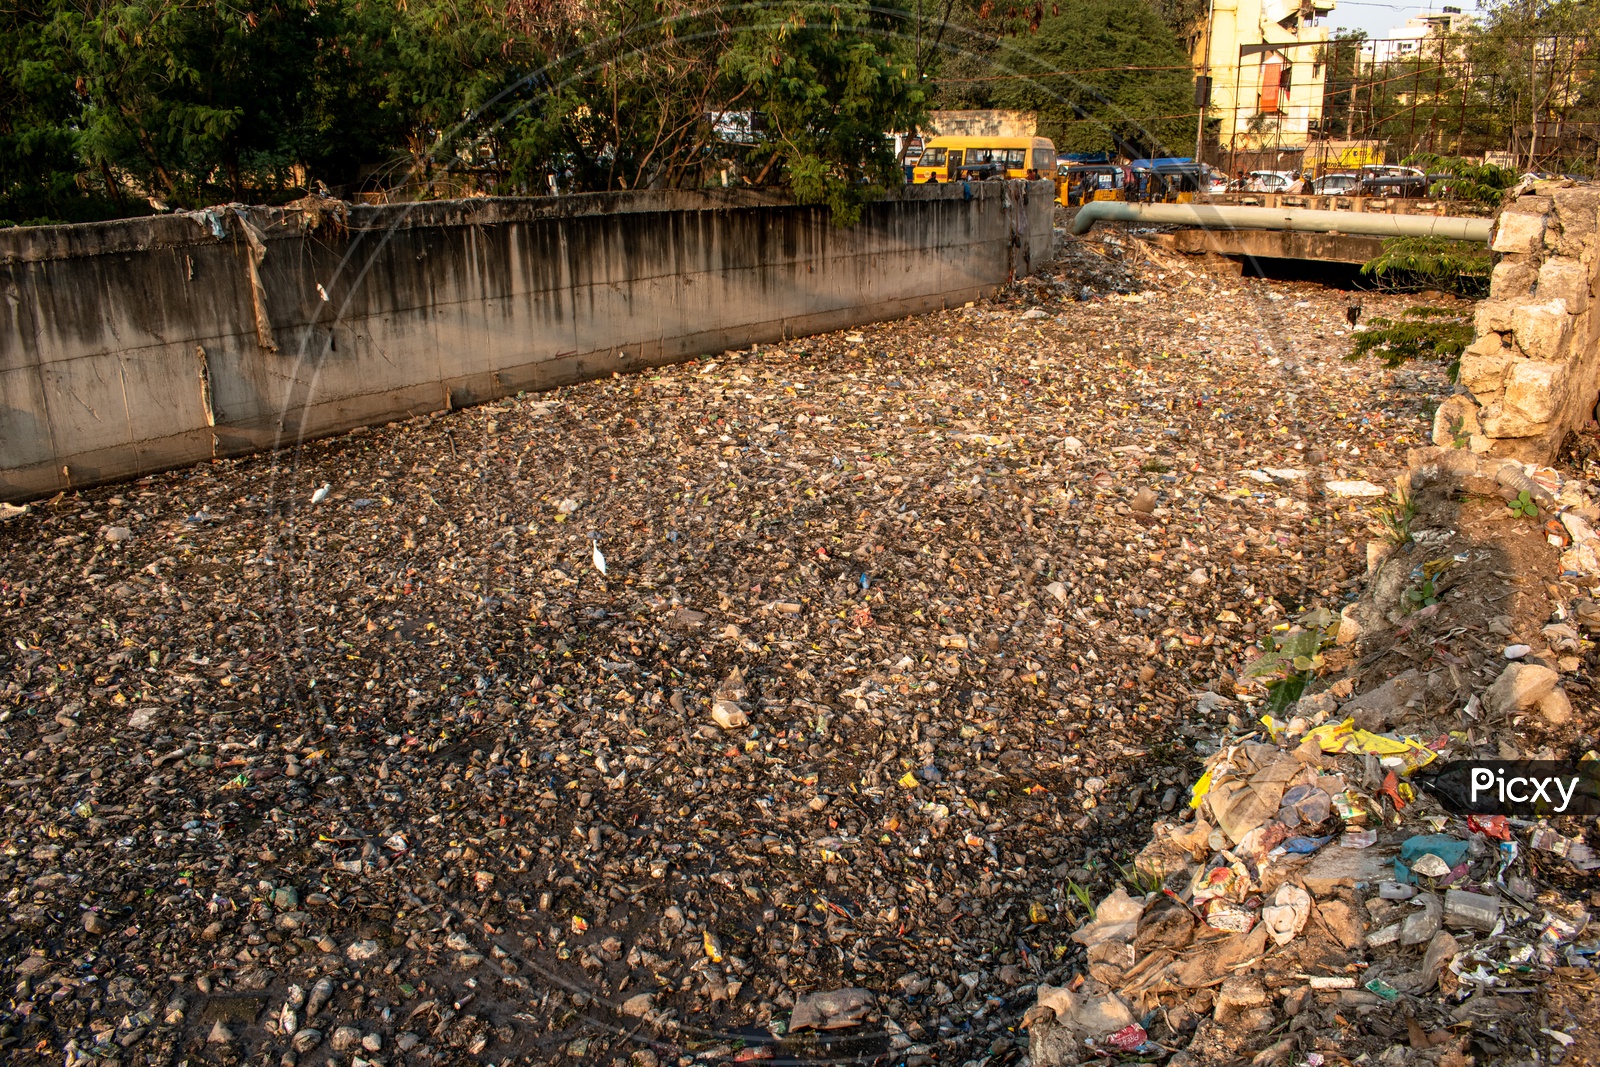 Canal/Drainage at Masab tank clogged because of plastic waste.